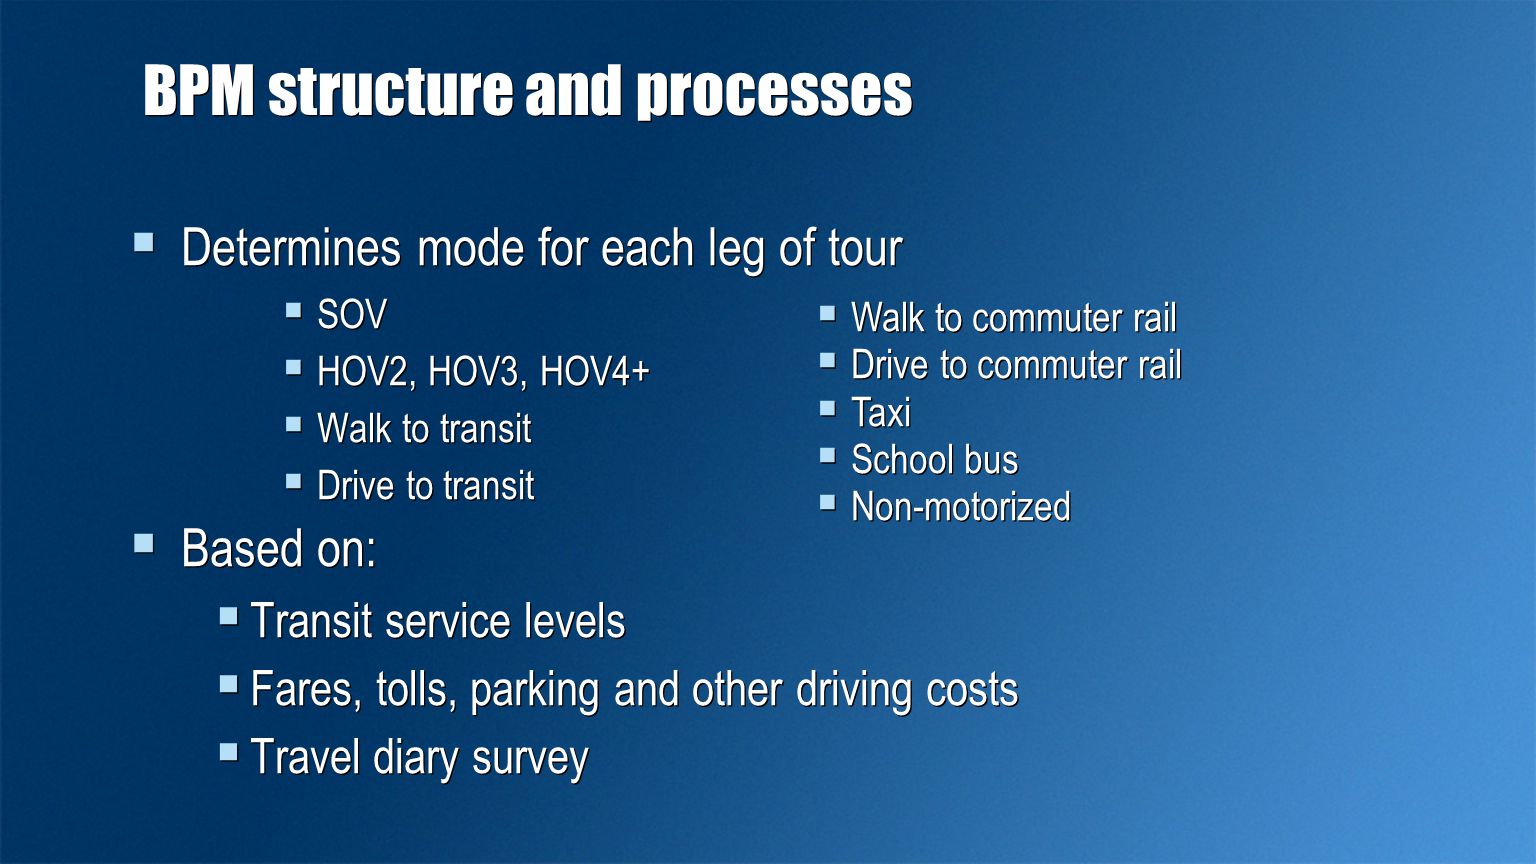 BPM structure and processes  Determines mode for each leg of tour  SOV  HOV2, HOV3, HOV4+  Walk to transit  Drive to transit  Based on:  Transit service levels  Fares, tolls, parking and other driving costs  Travel diary survey  Determines mode for each leg of tour  SOV  HOV2, HOV3, HOV4+  Walk to transit  Drive to transit  Based on:  Transit service levels  Fares, tolls, parking and other driving costs  Travel diary survey  Walk to commuter rail  Drive to commuter rail  Taxi  School bus  Non-motorized  Walk to commuter rail  Drive to commuter rail  Taxi  School bus  Non-motorized